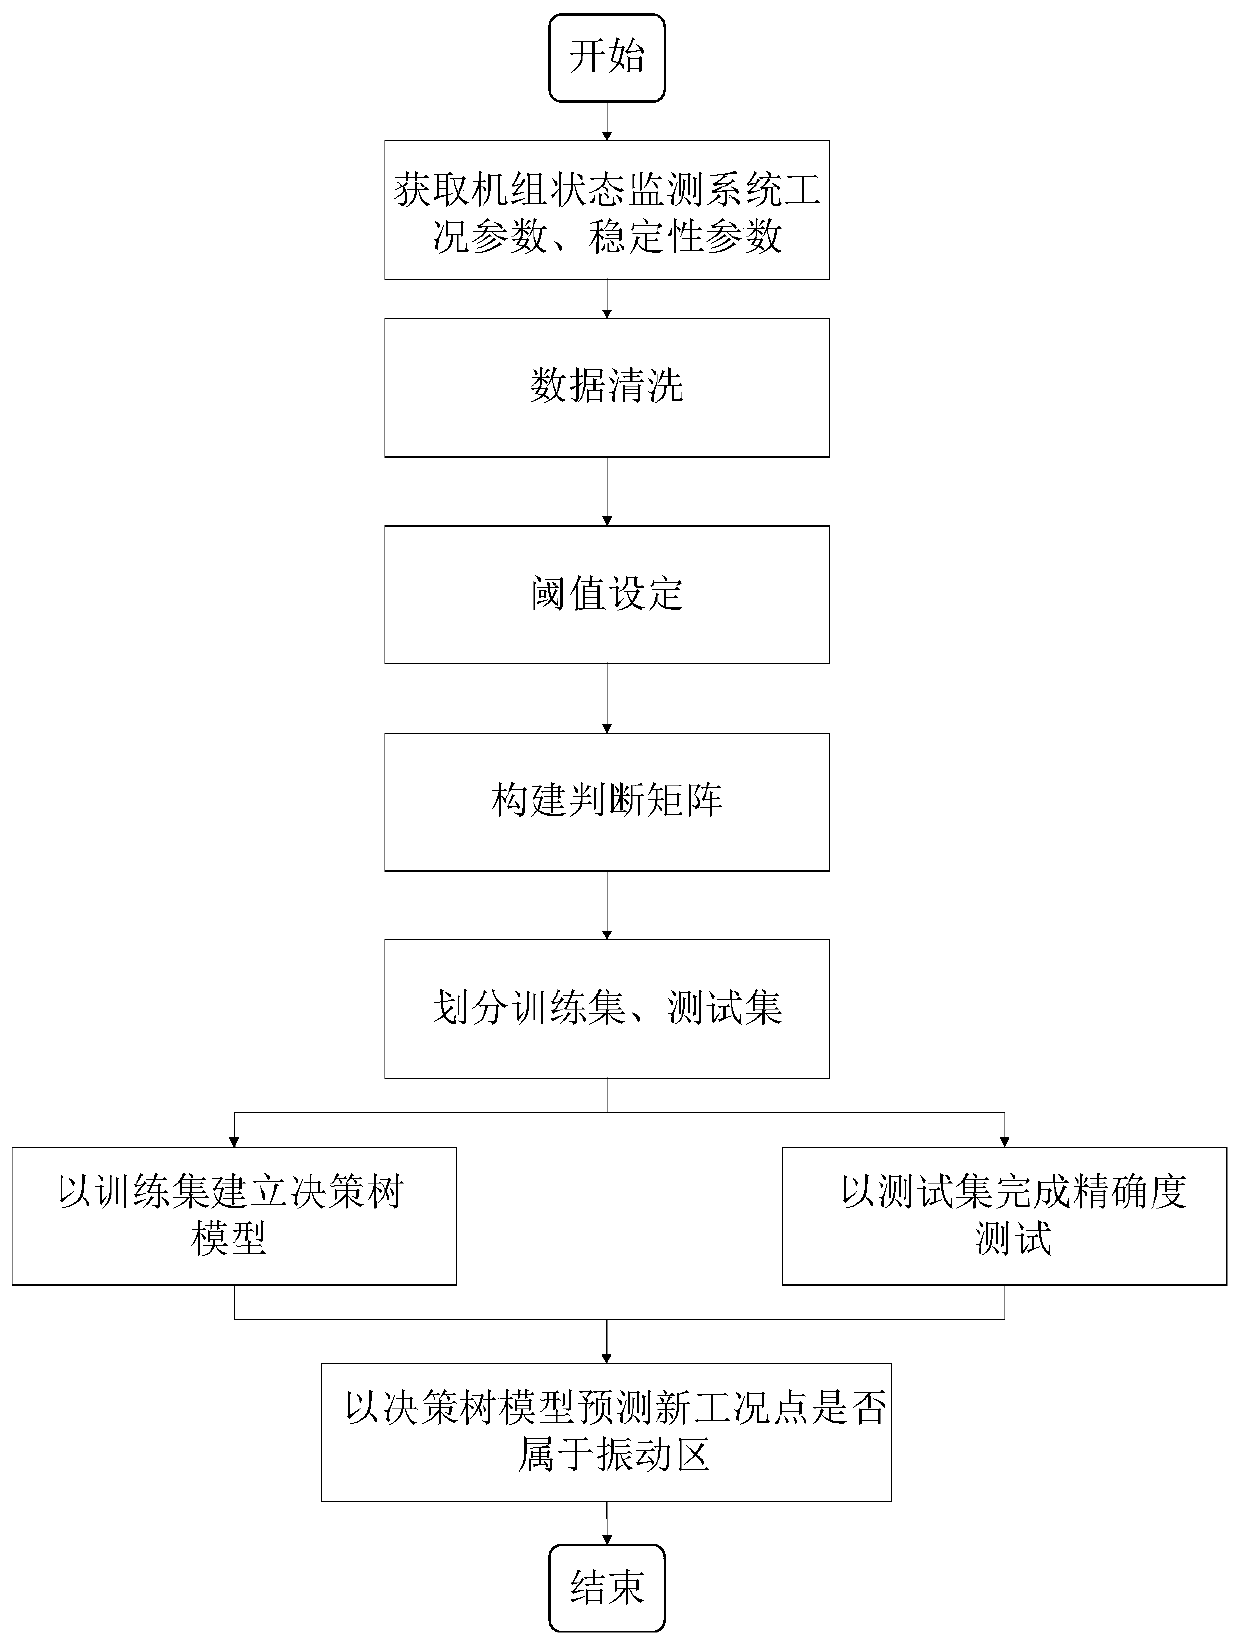 Hydroelectric generating set multi-dimensional vibration area fine division method based on decision tree model